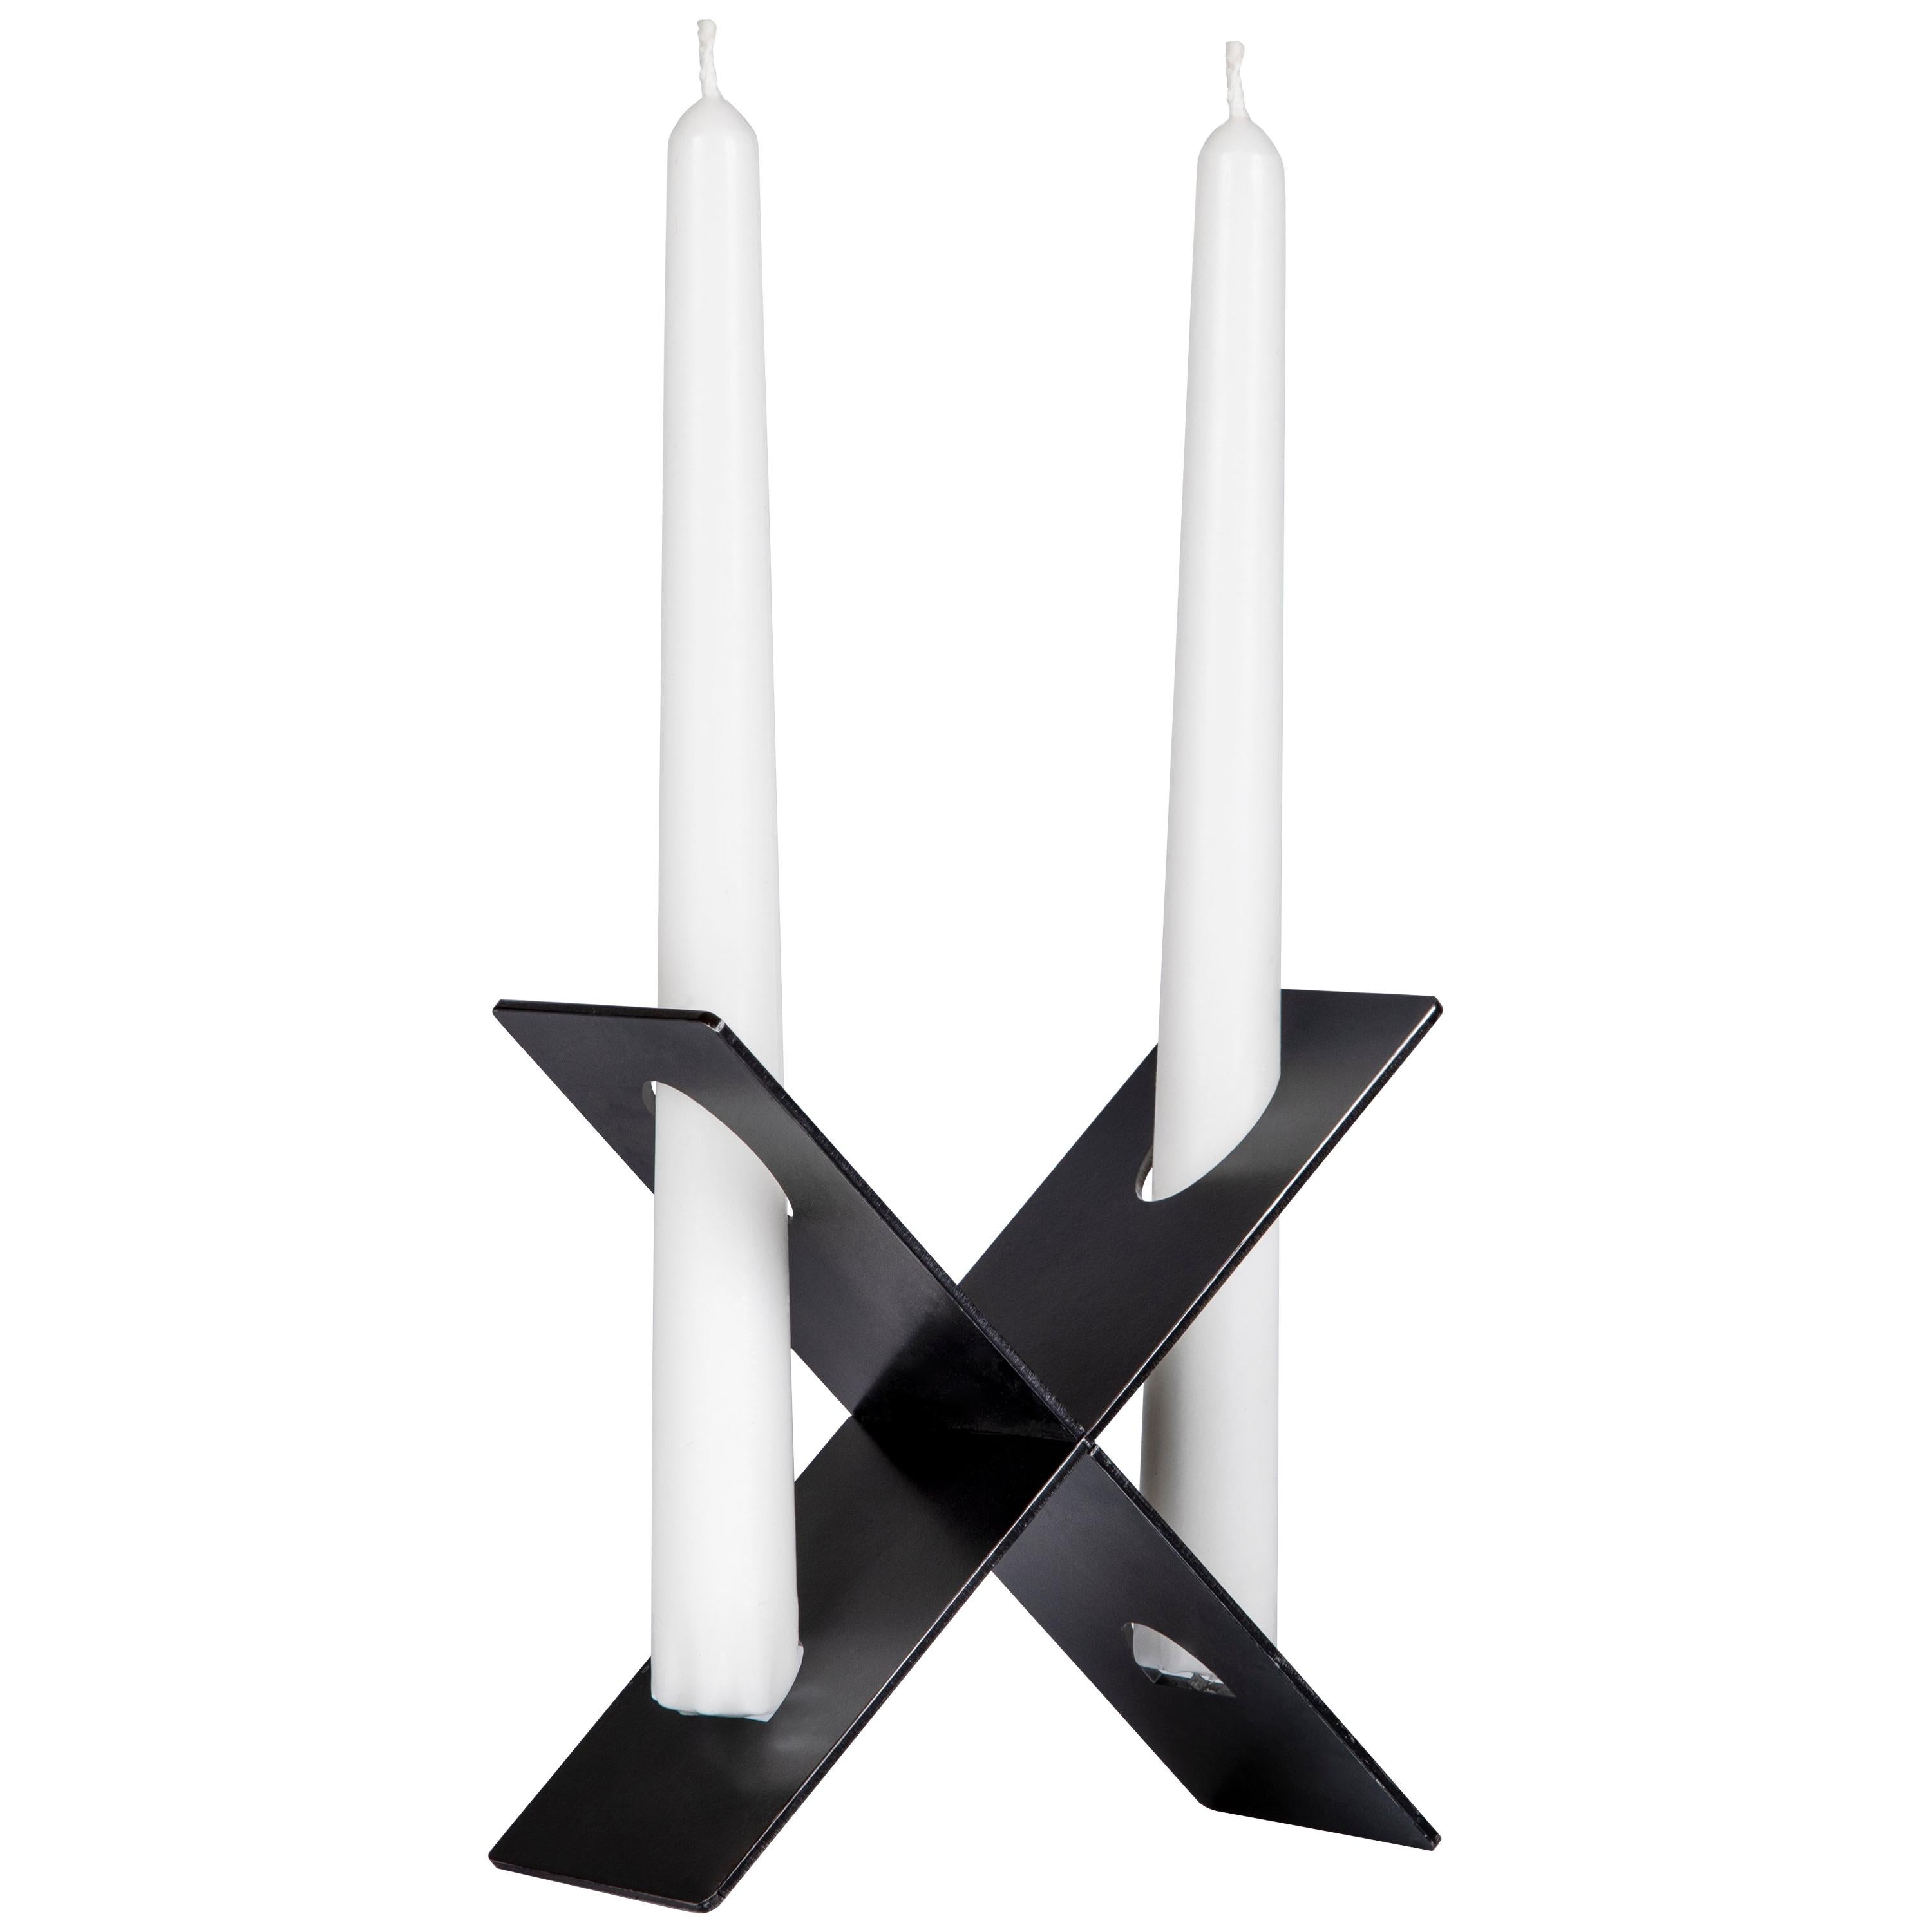 Luigi is a Removable Two-Arms Design Iron Candleholder im Angebot